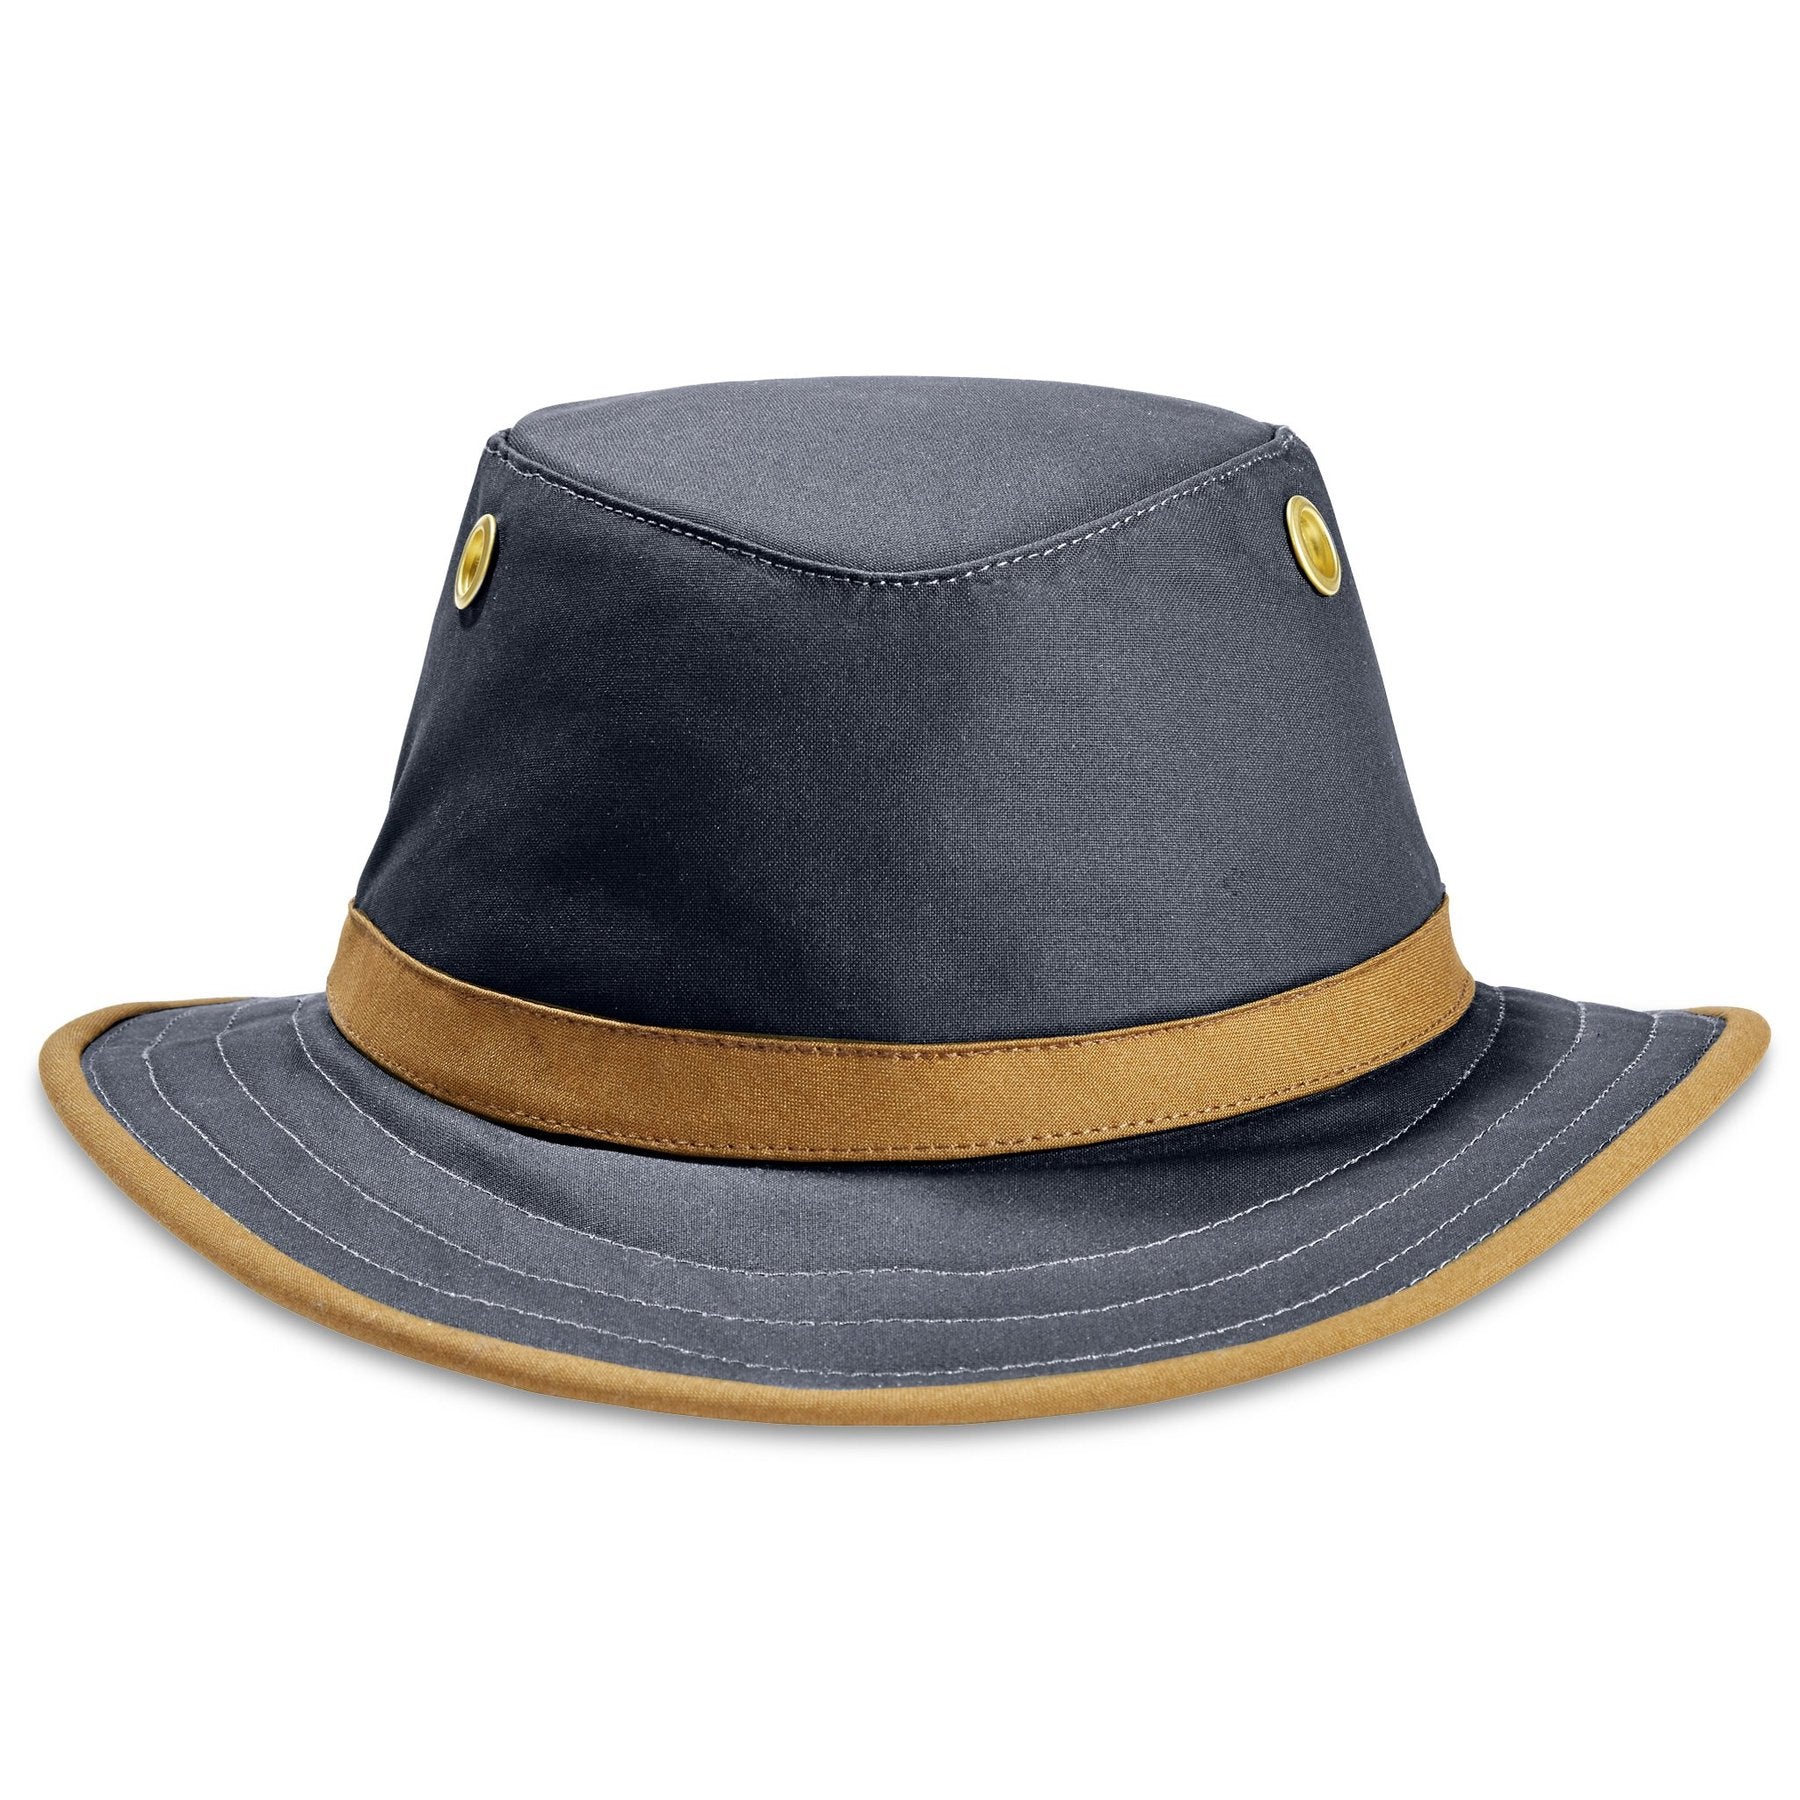 Tilley - TWC7 Outback Waxed Cotton Hat - Navy / Tan